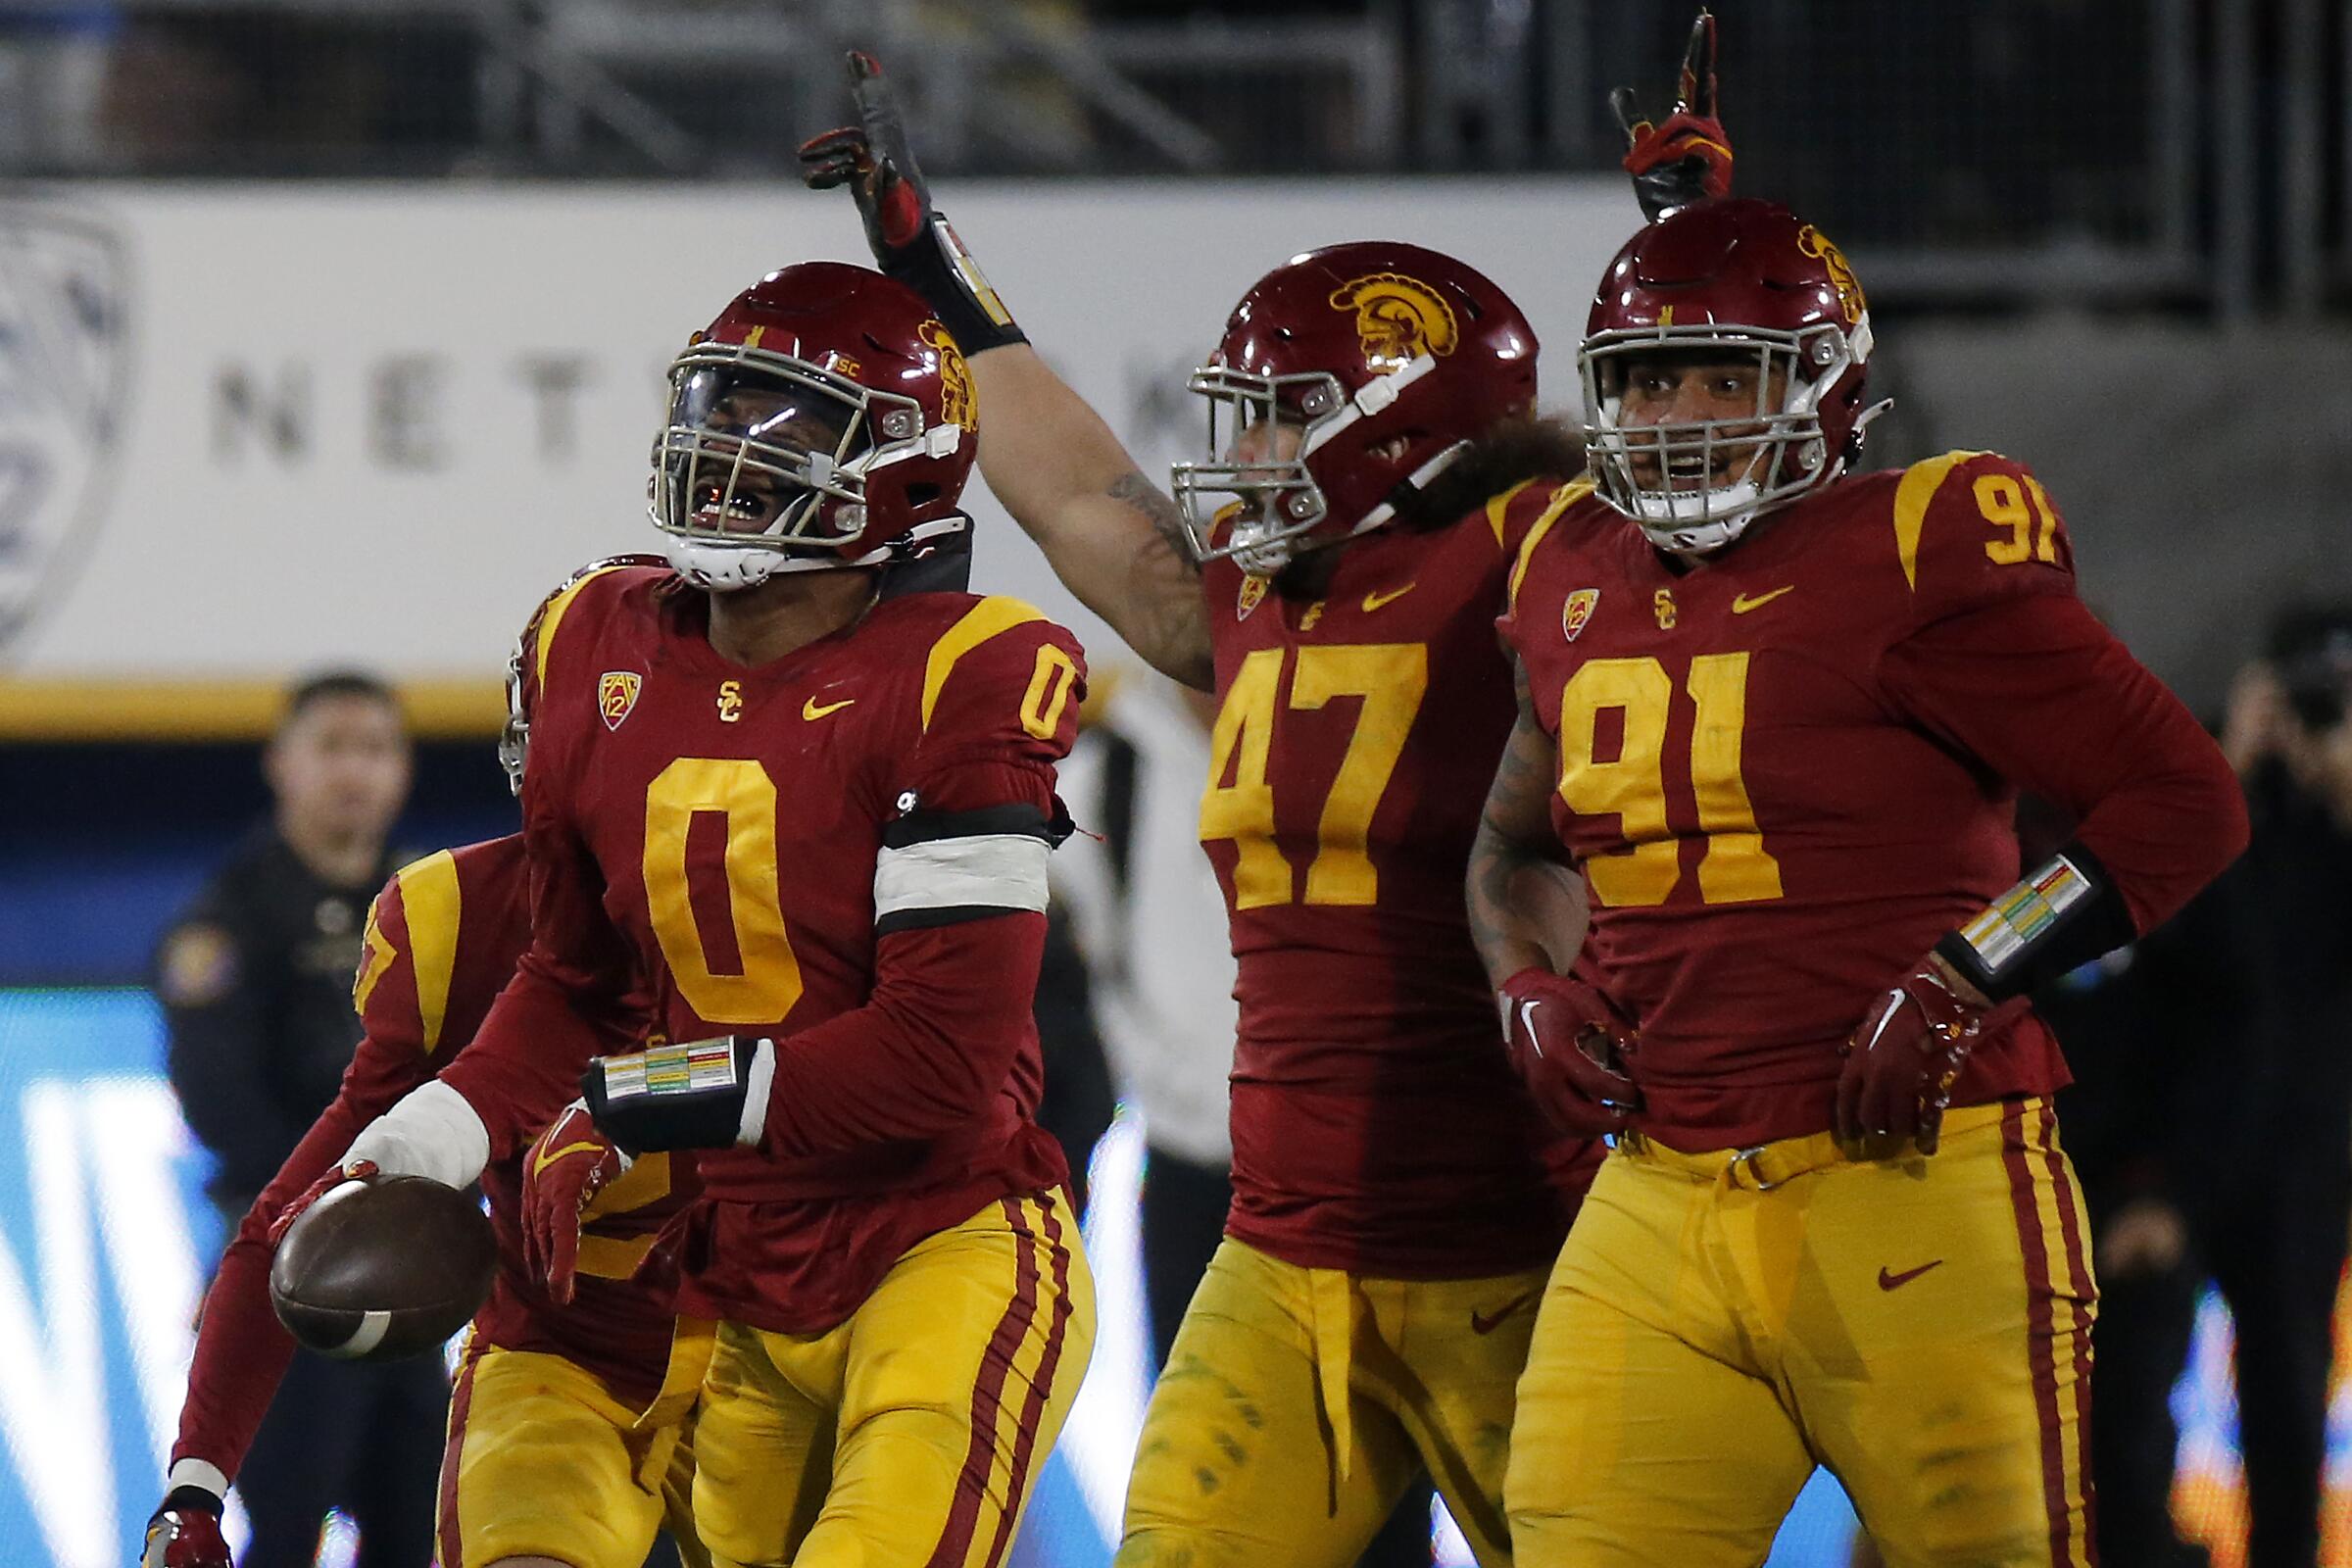 USC player raises his hands and his pointer fingers while teammates walk with him.